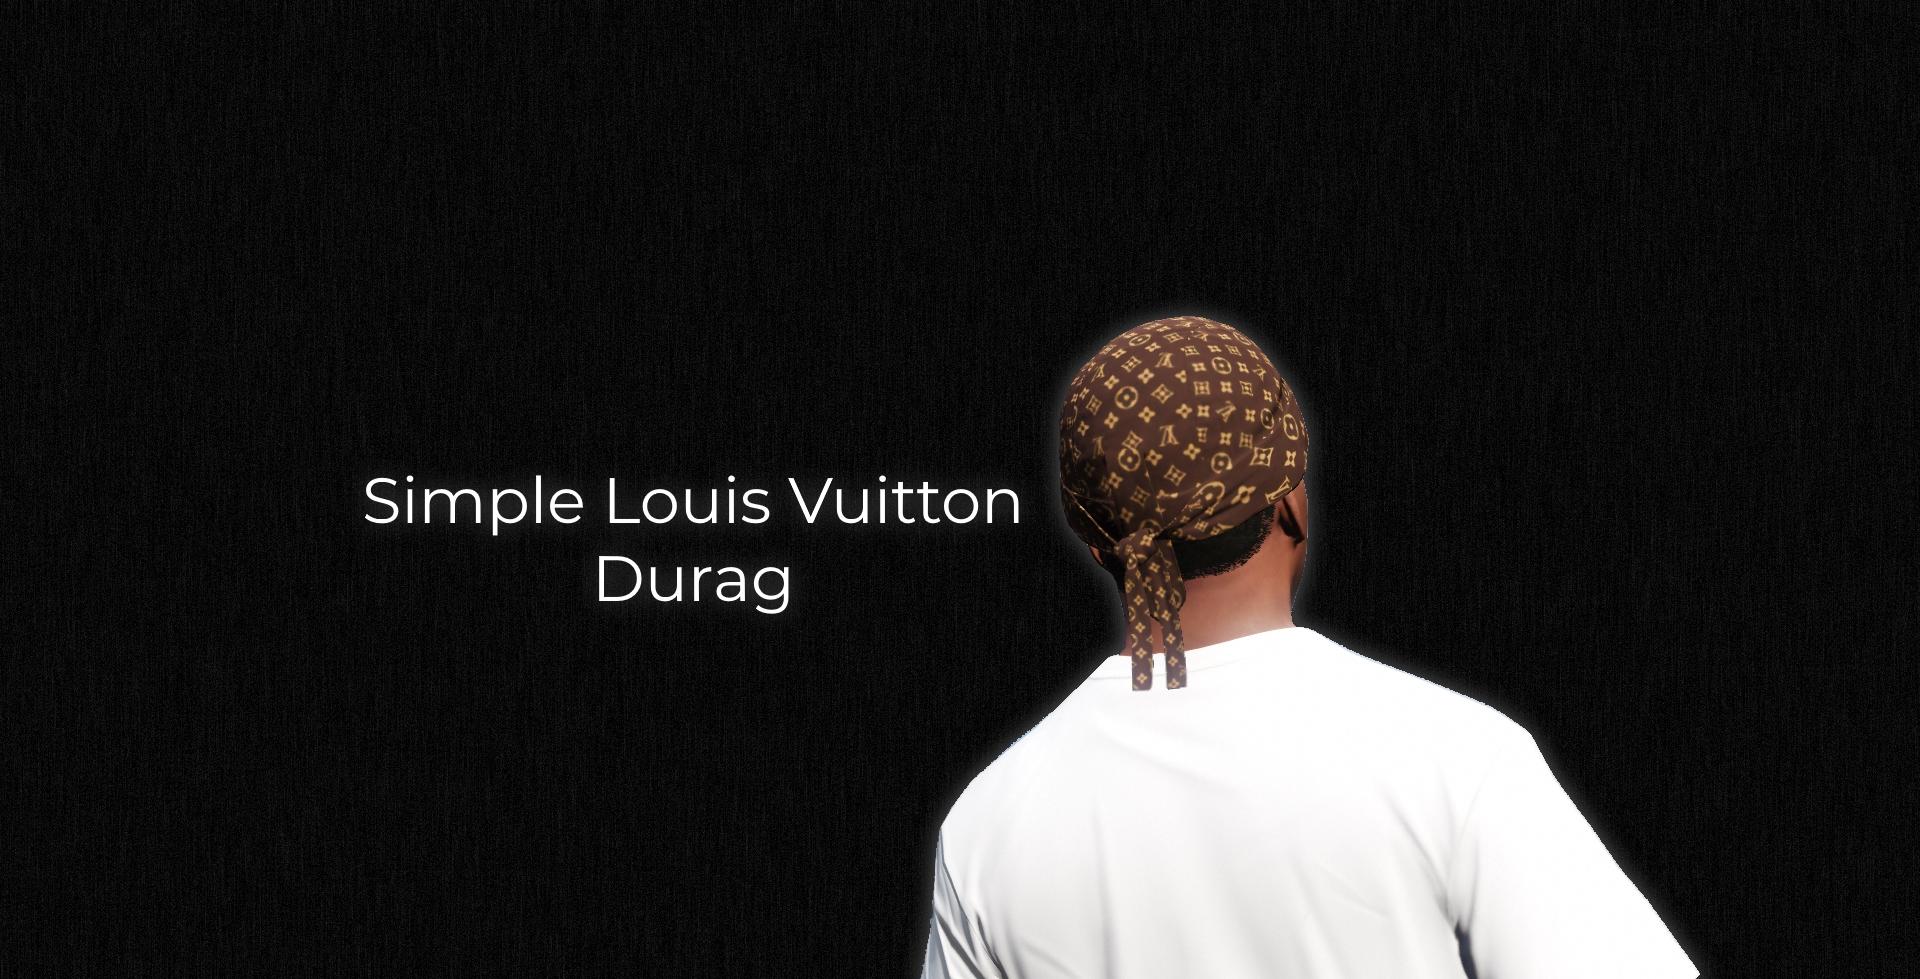 Supreme Louis Vuitton Durag Amazon | Confederated Tribes of the Umatilla Indian Reservation